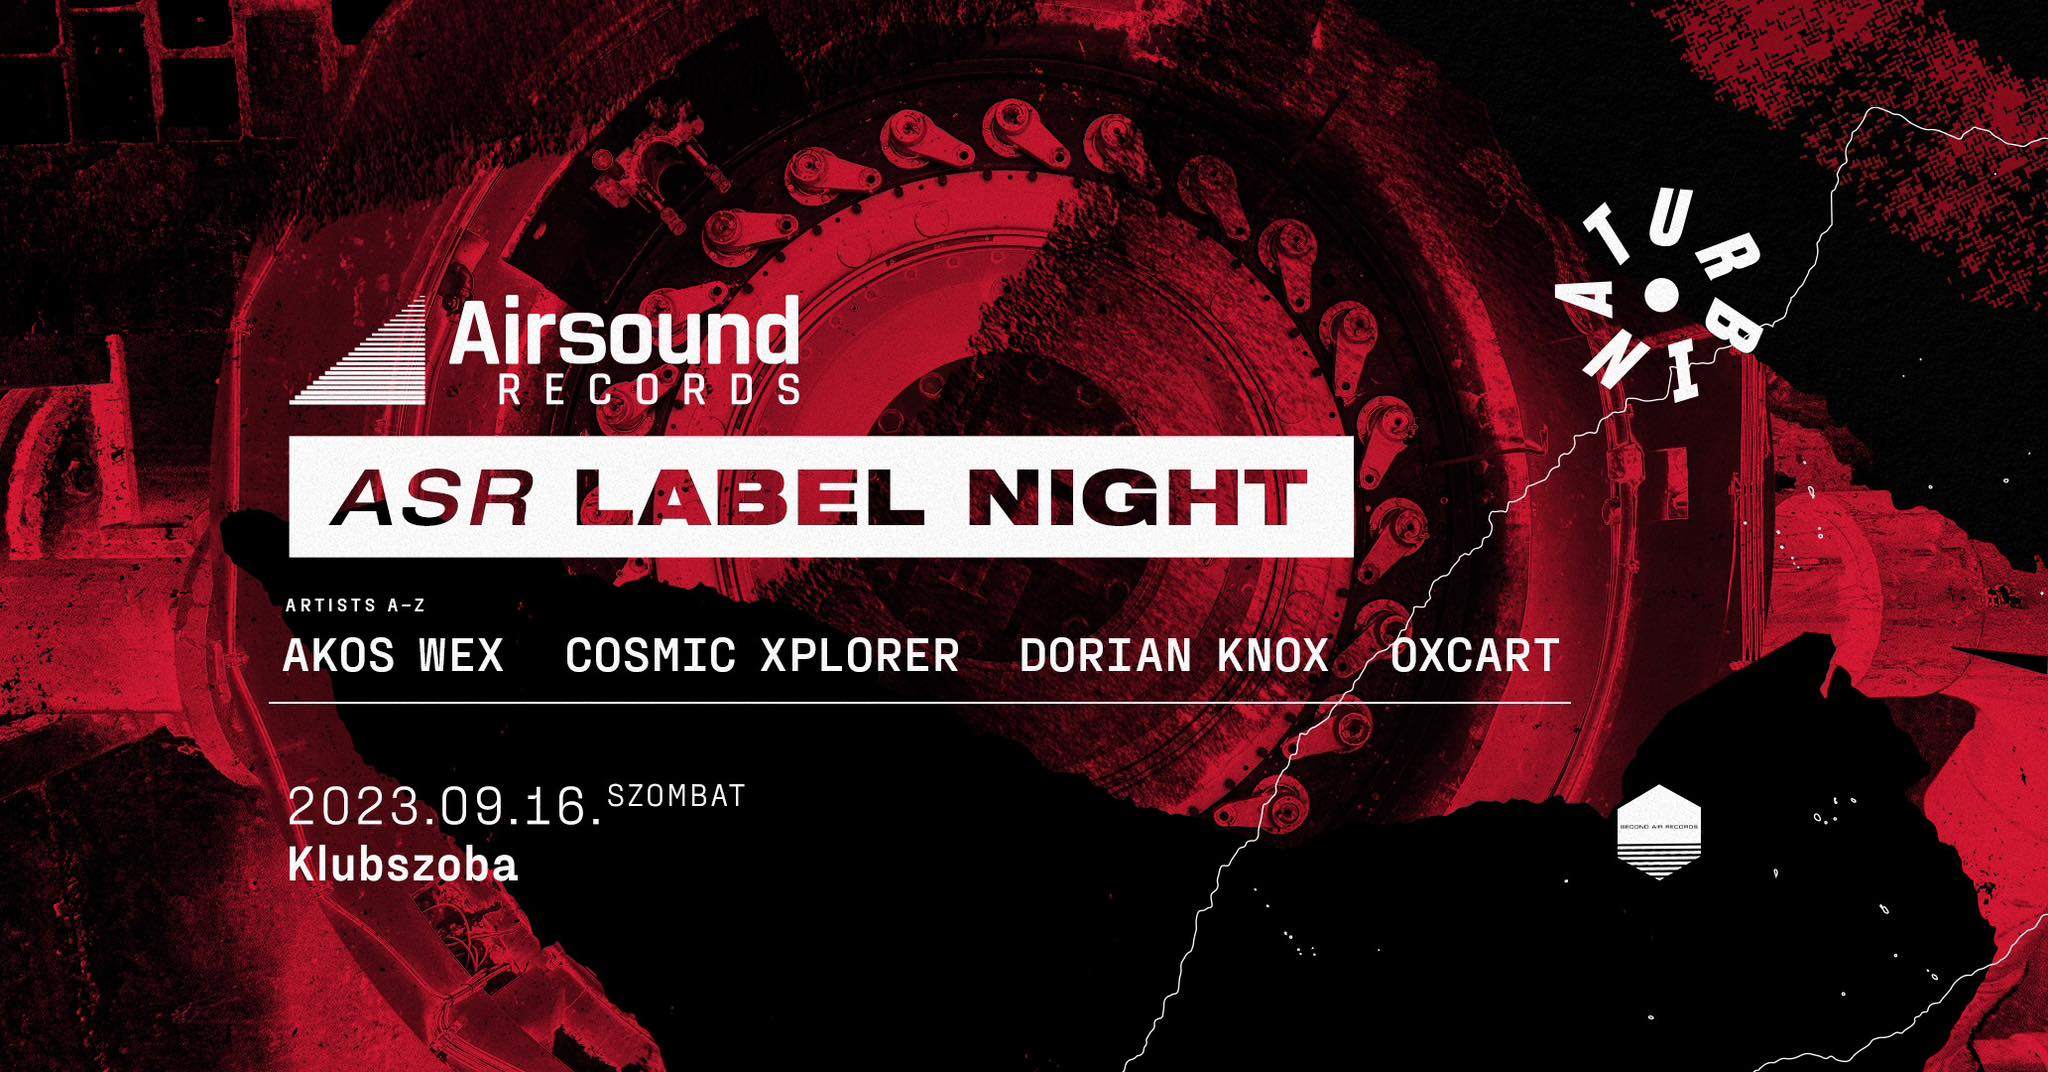 AIRSOUND RECORDS Label Night with Akos Wex, Cosmic Xplorer, Dorian Knox, Oxcart - フライヤー表